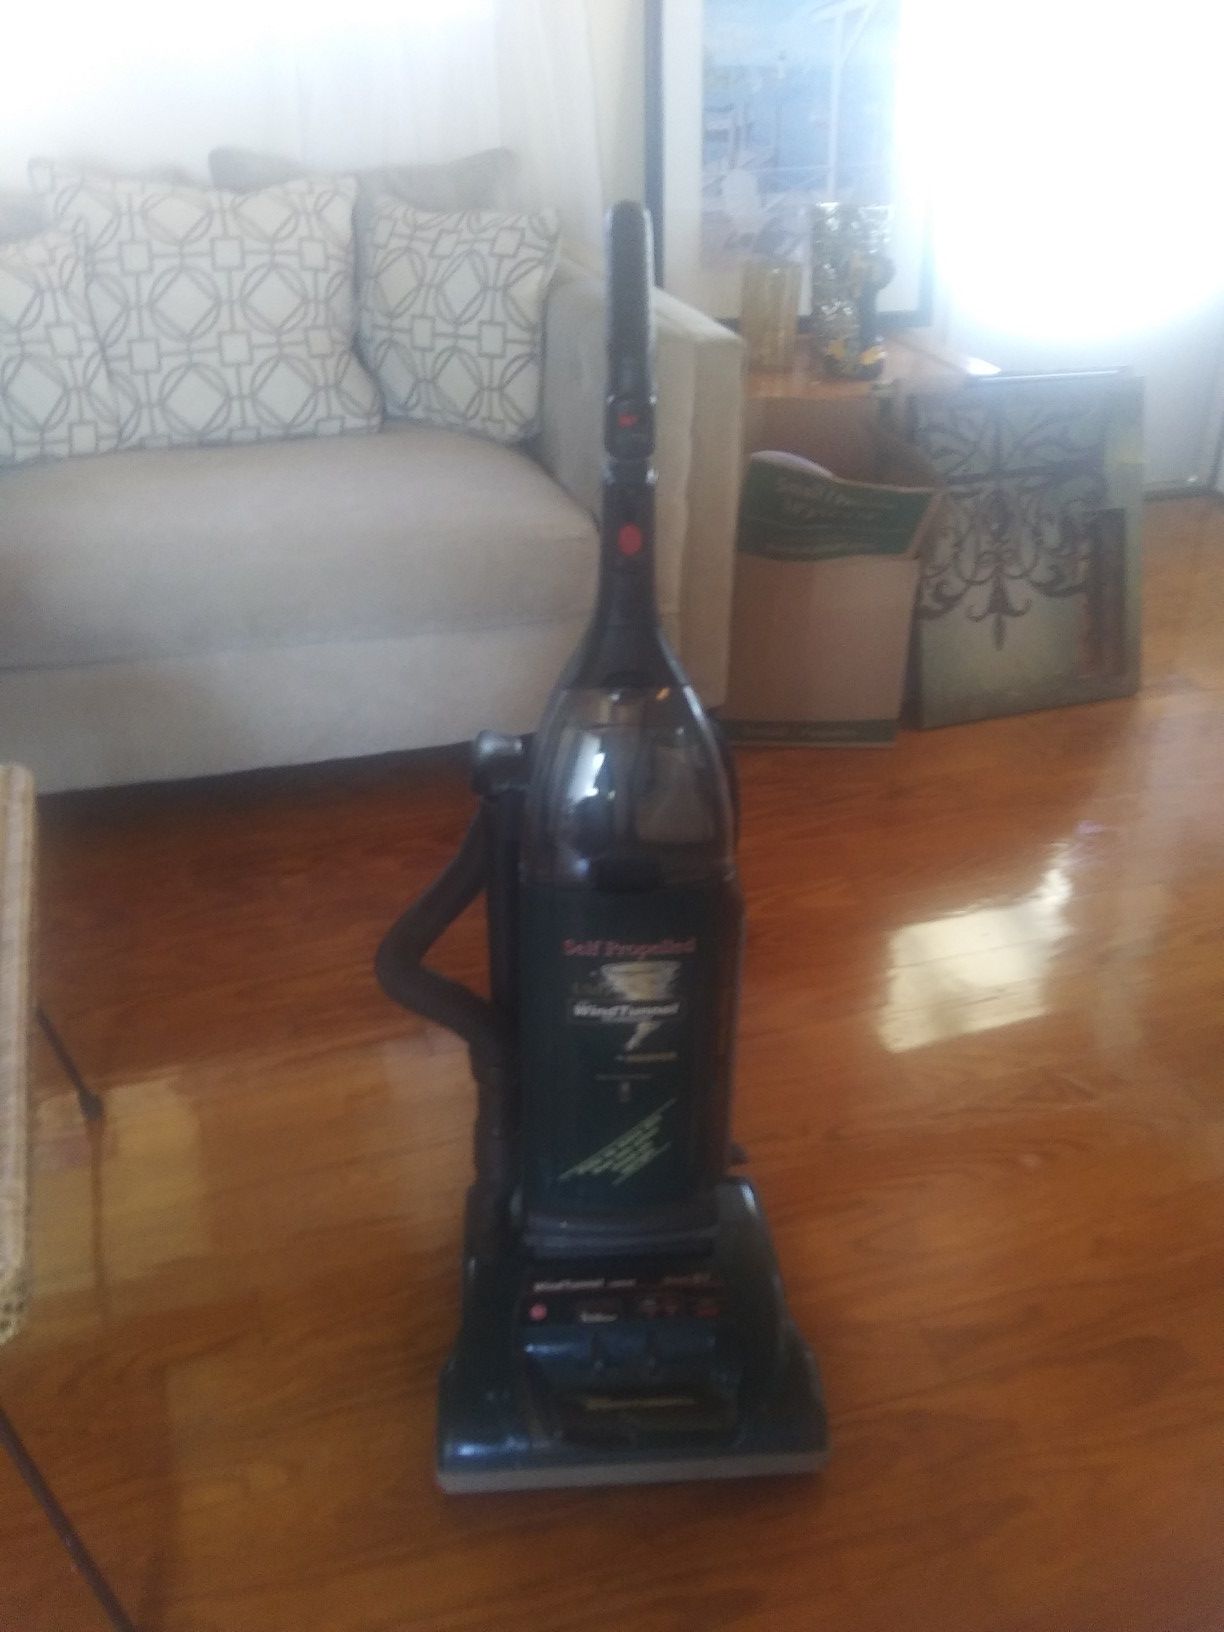 Hoover vacuum with attachments. Good condition.